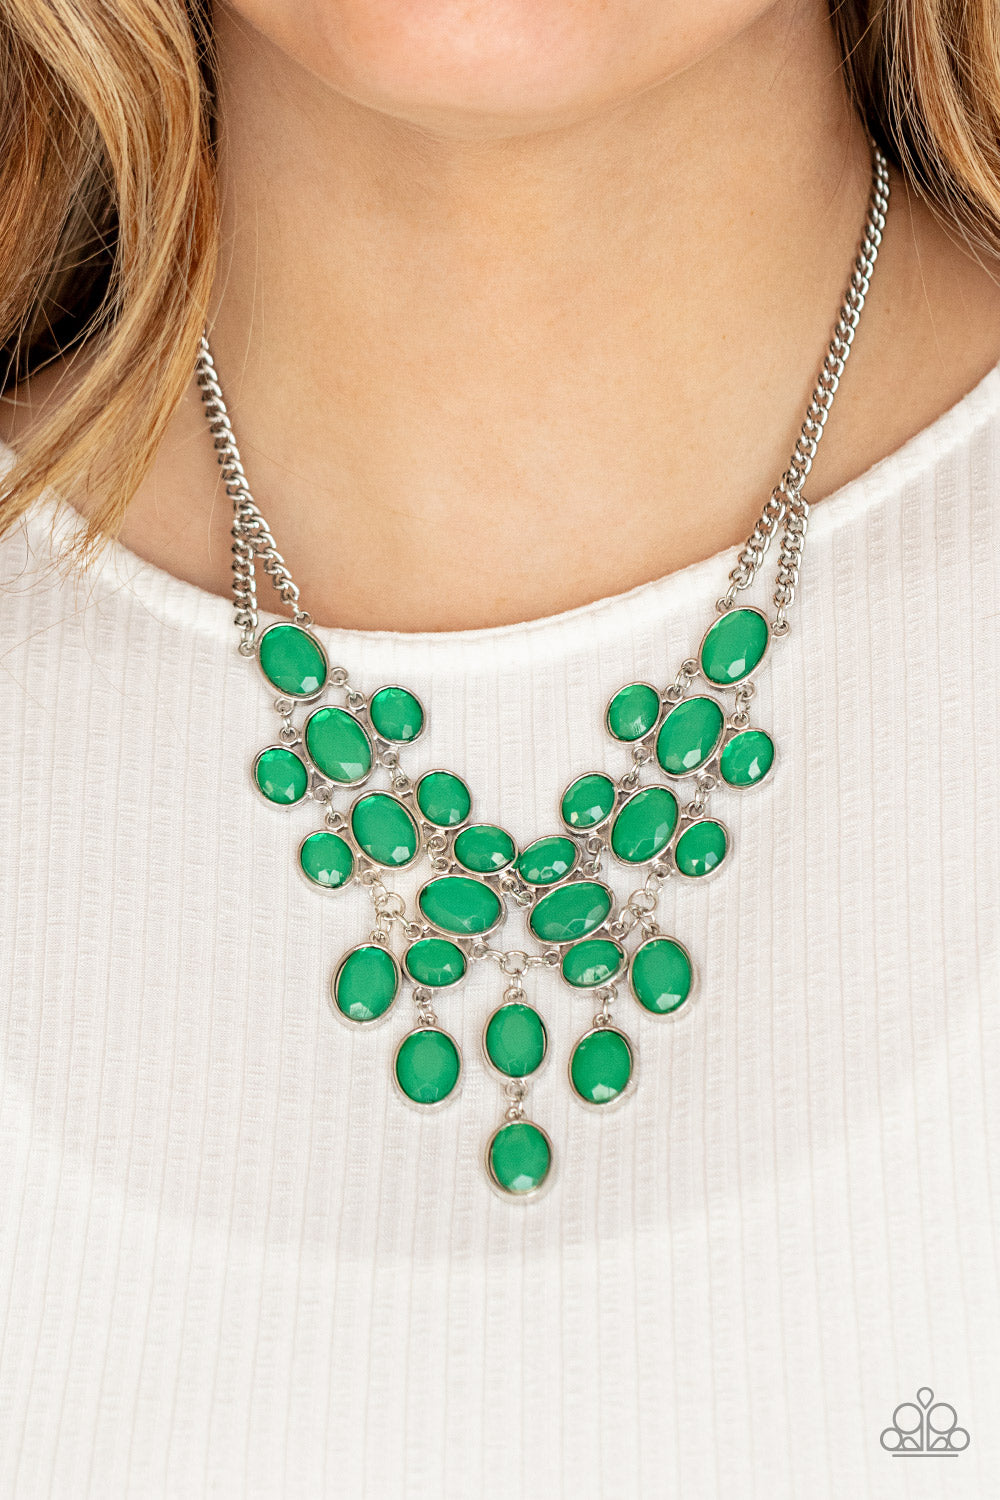 Paparazzi Serene Gleam - Green Necklace - A Finishing Touch Jewelry